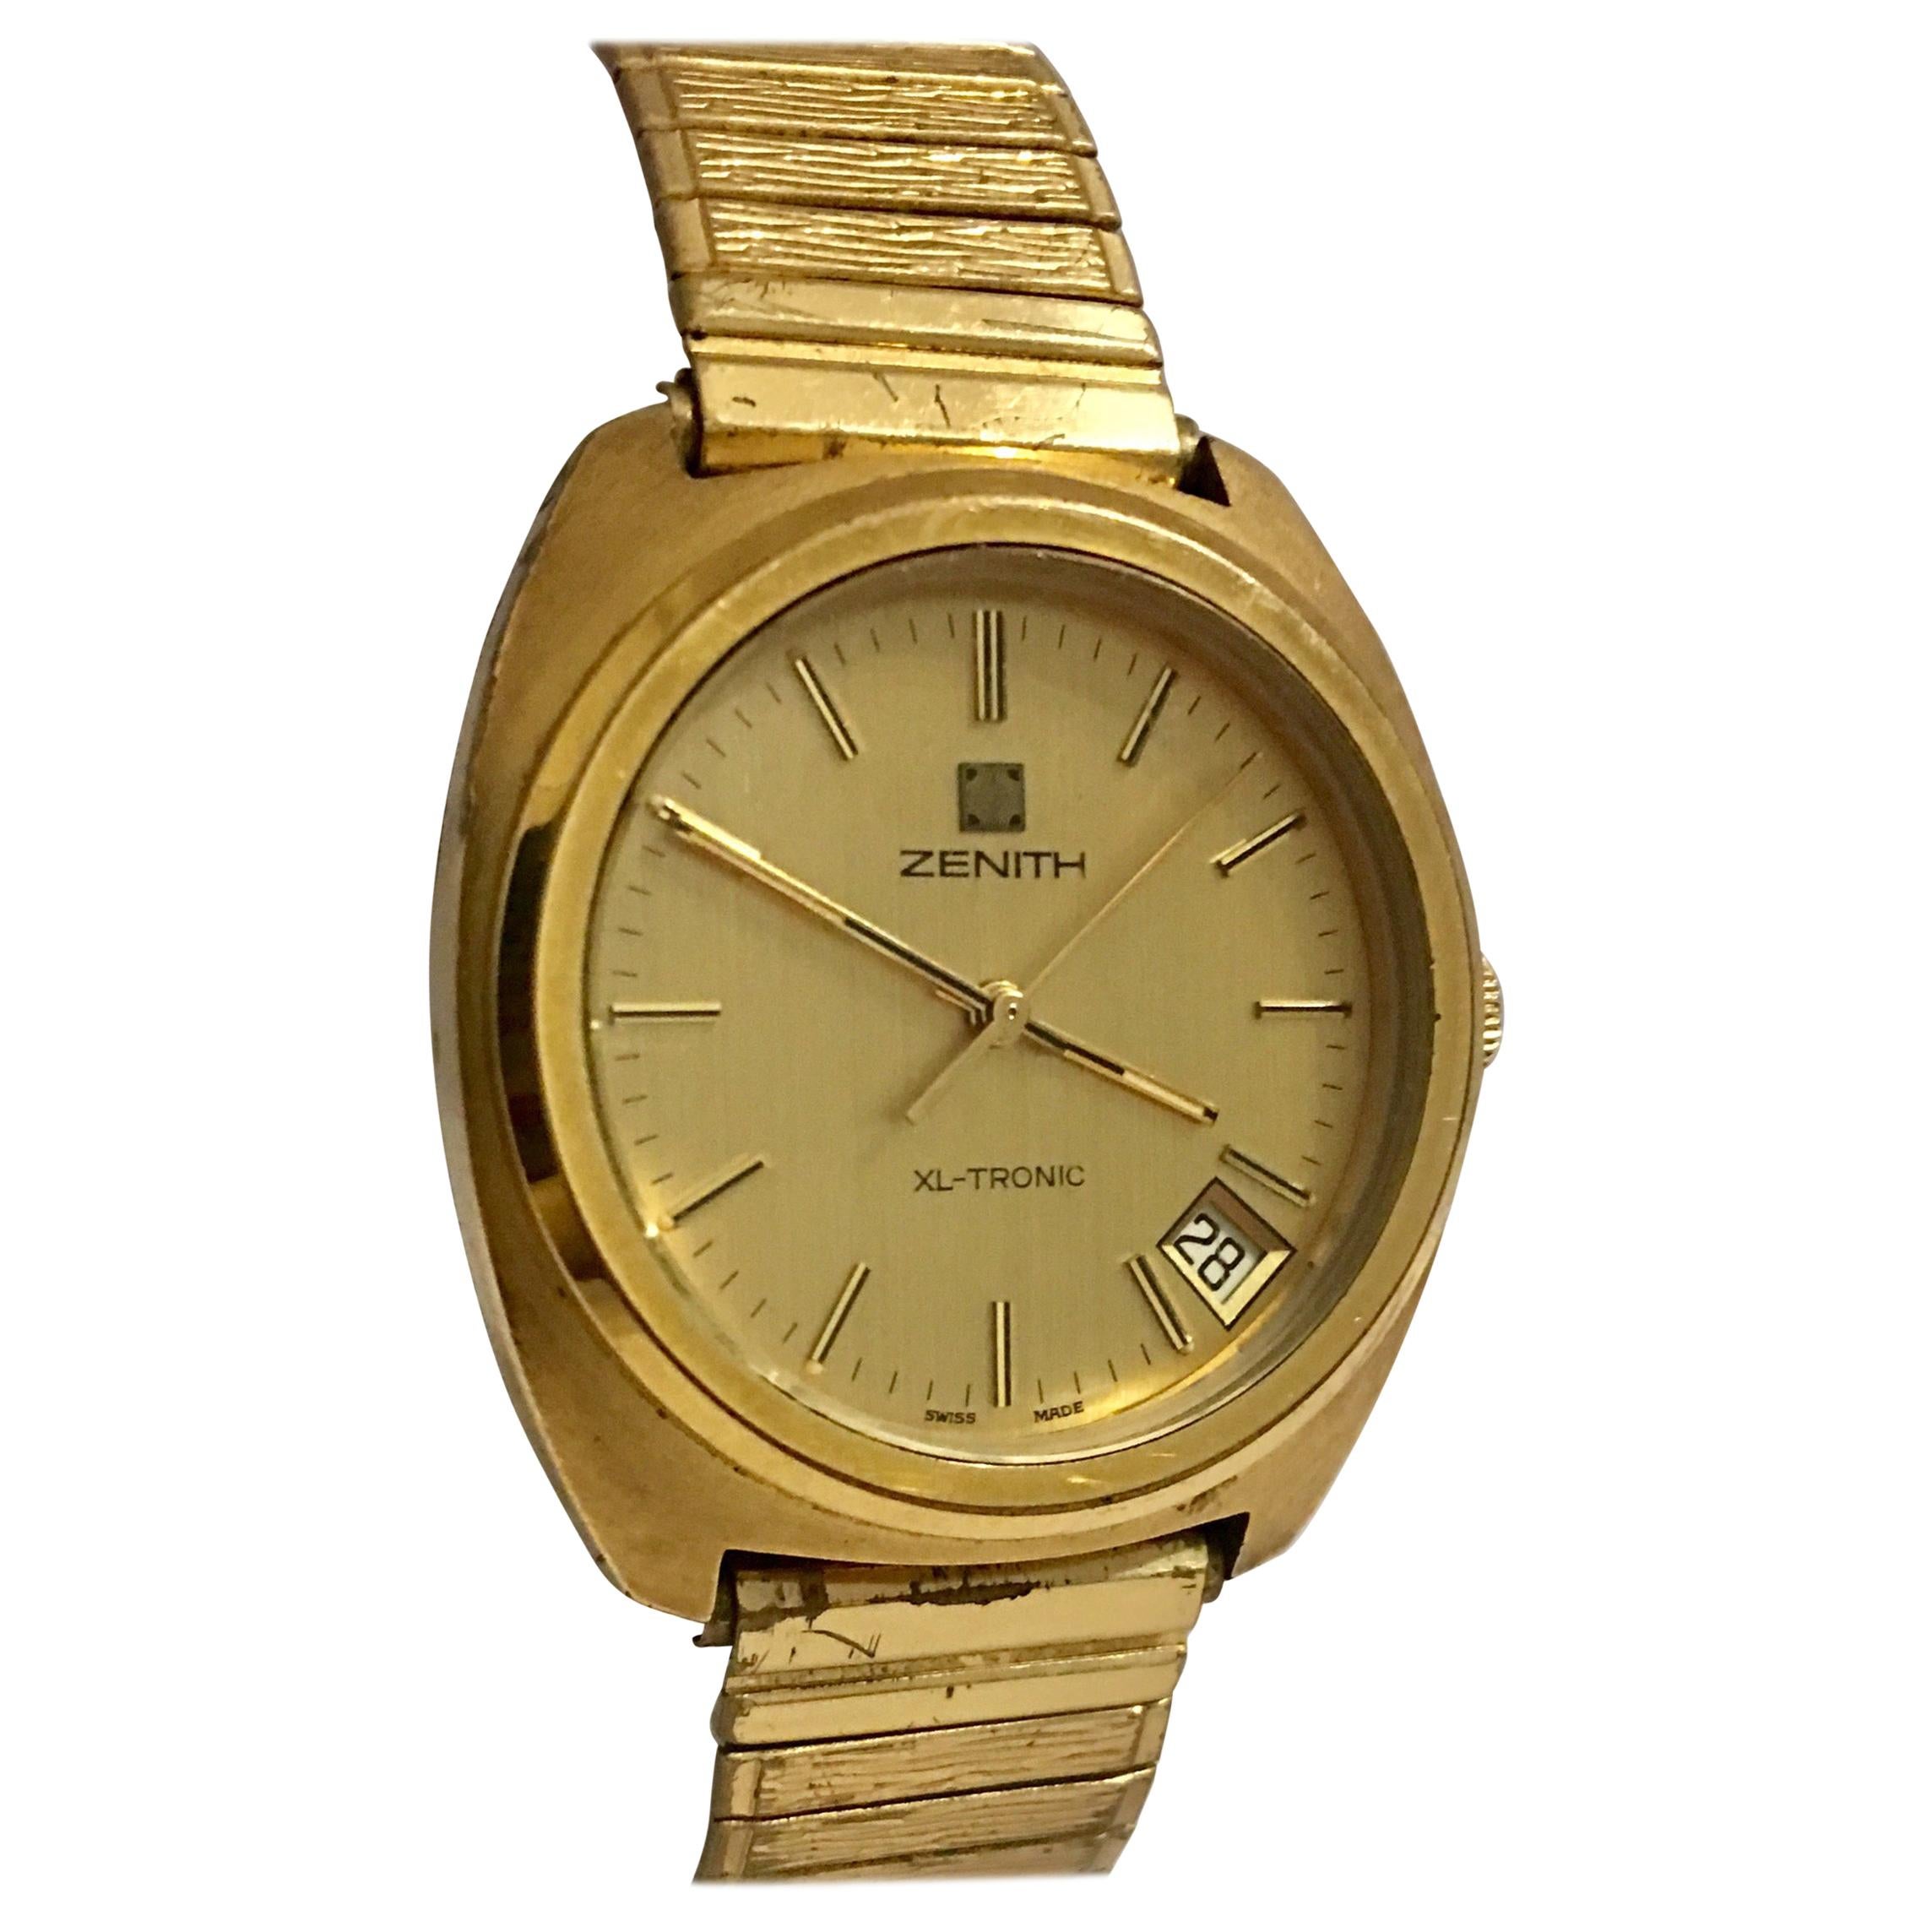 Vintage 1970s Zenith XL-Tronic Gold-Plated/ Stainless Steel Men’s Watch For Sale